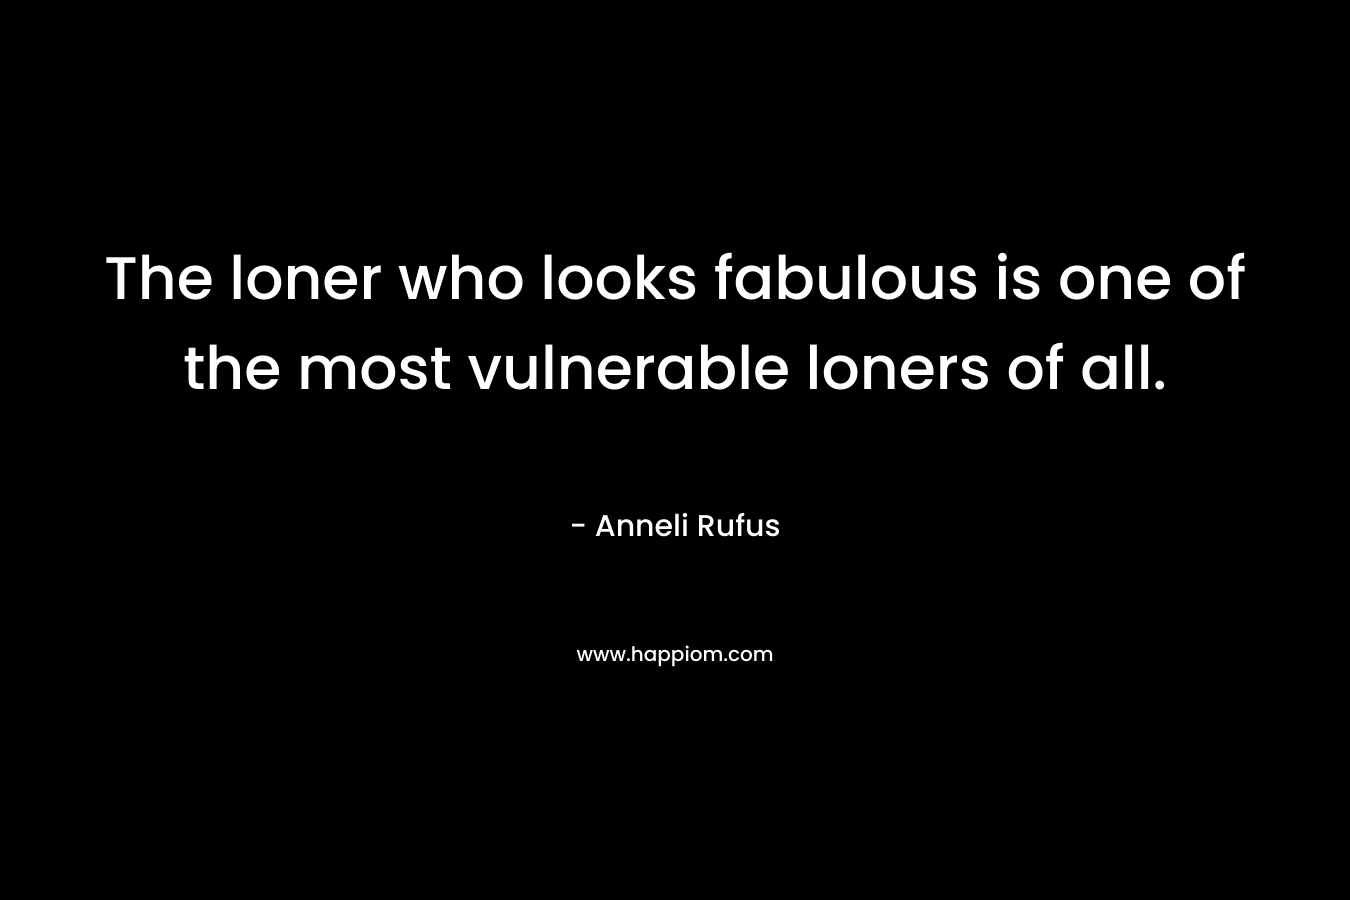 The loner who looks fabulous is one of the most vulnerable loners of all.